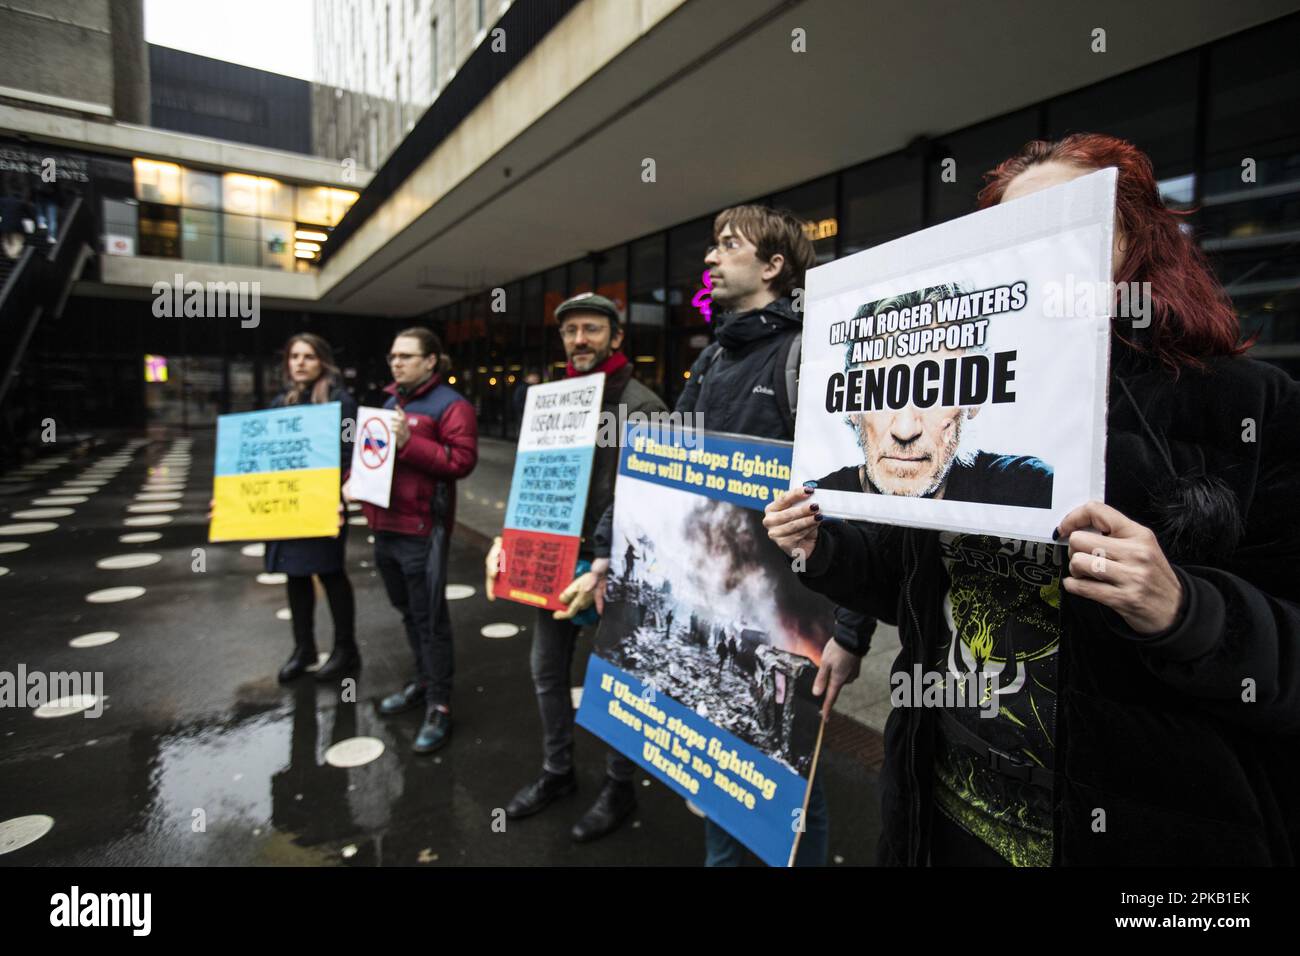 AMSTERDAM - People stand with protest signs outside the Ziggo Dome of Pink Floyd icon Roger Waters performance. ANP EVA PLEVIER netherlands out - belgium out Stock Photo